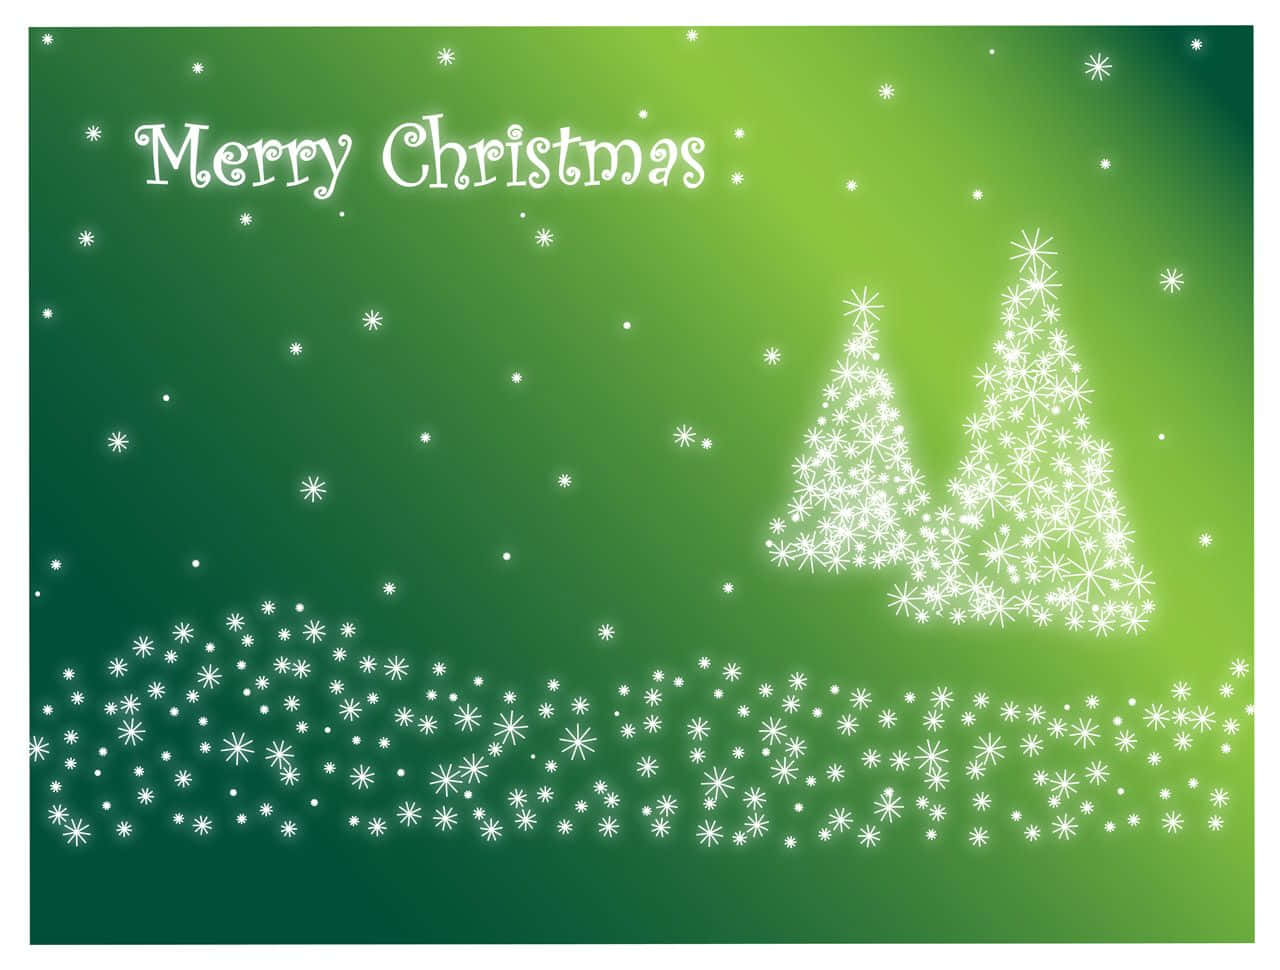 merry christmas card with trees and snowflakes vector Wallpaper